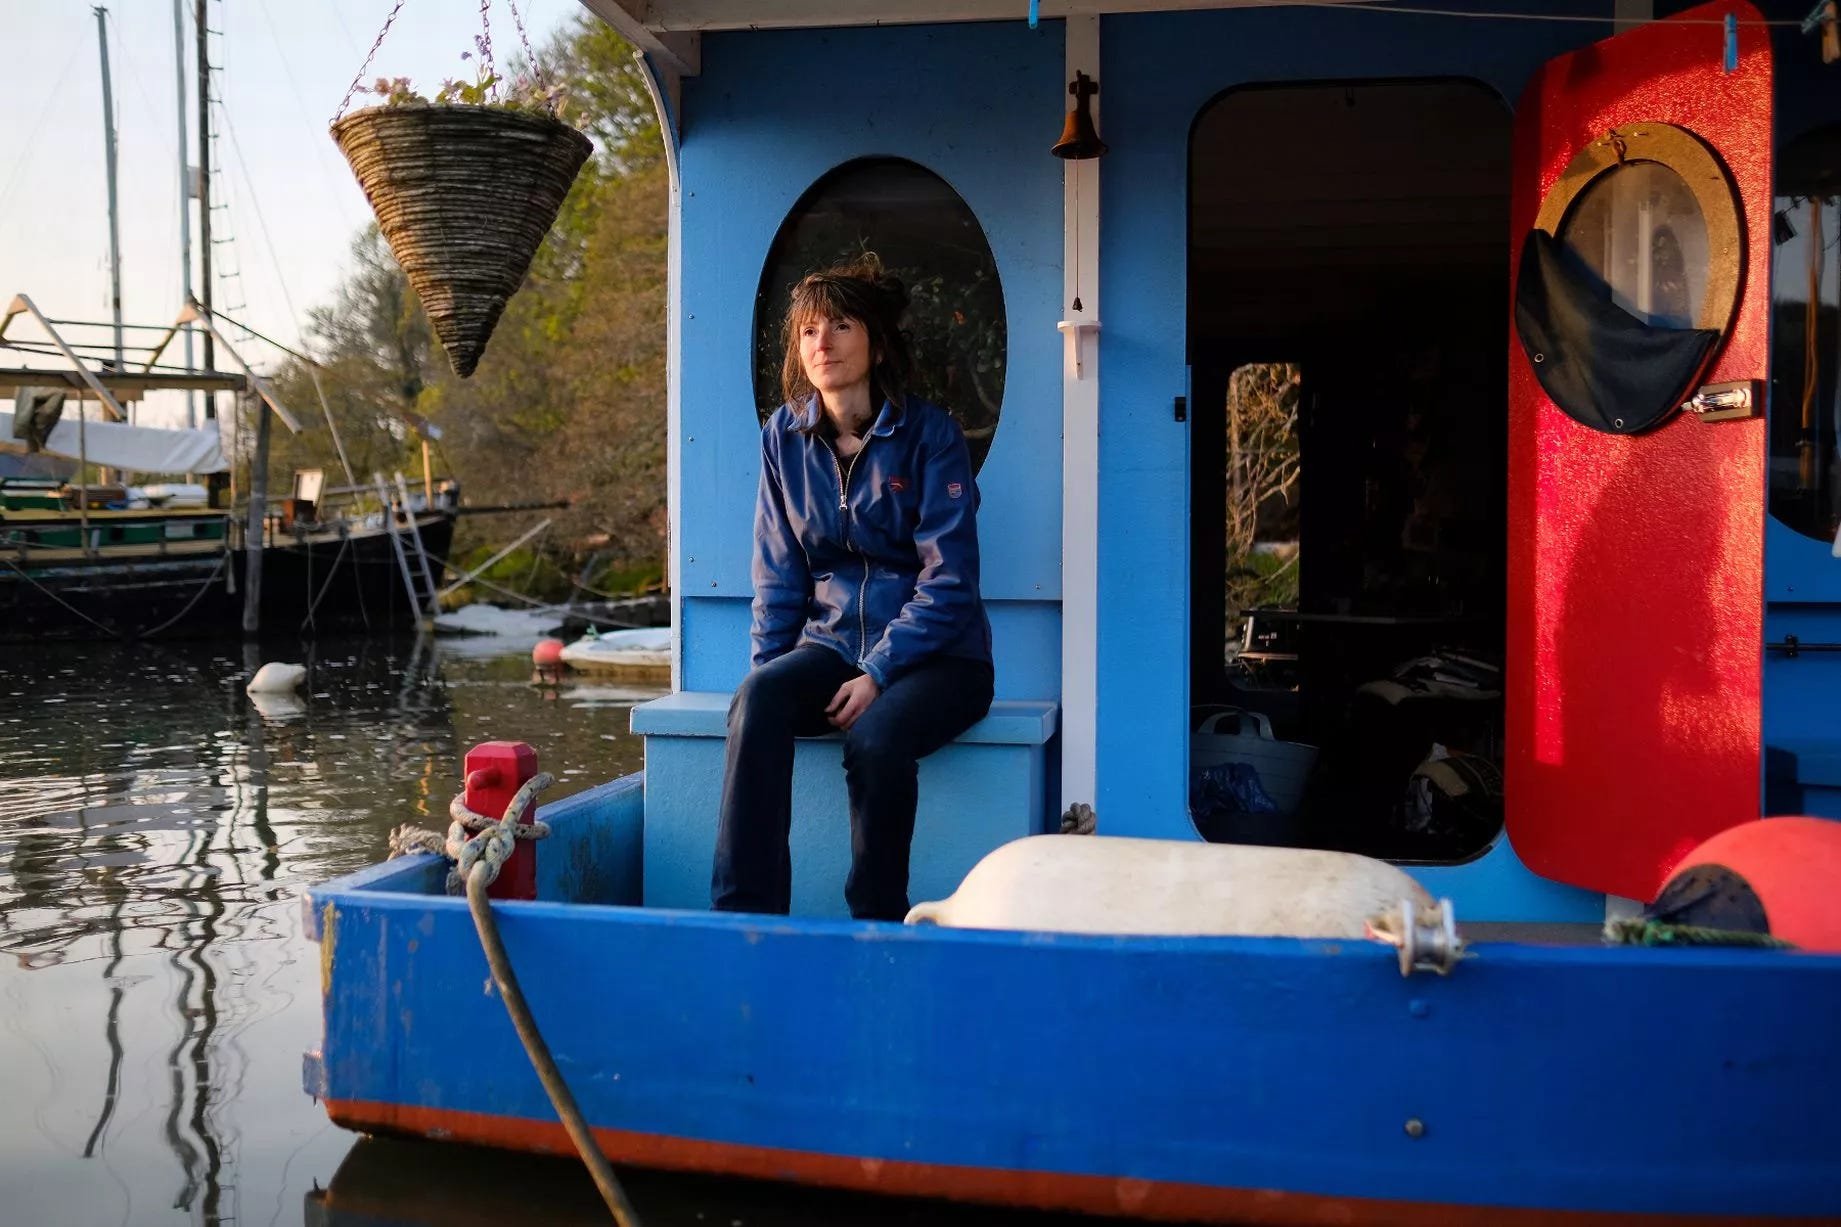 The Bosnian Who Lives on a Boat